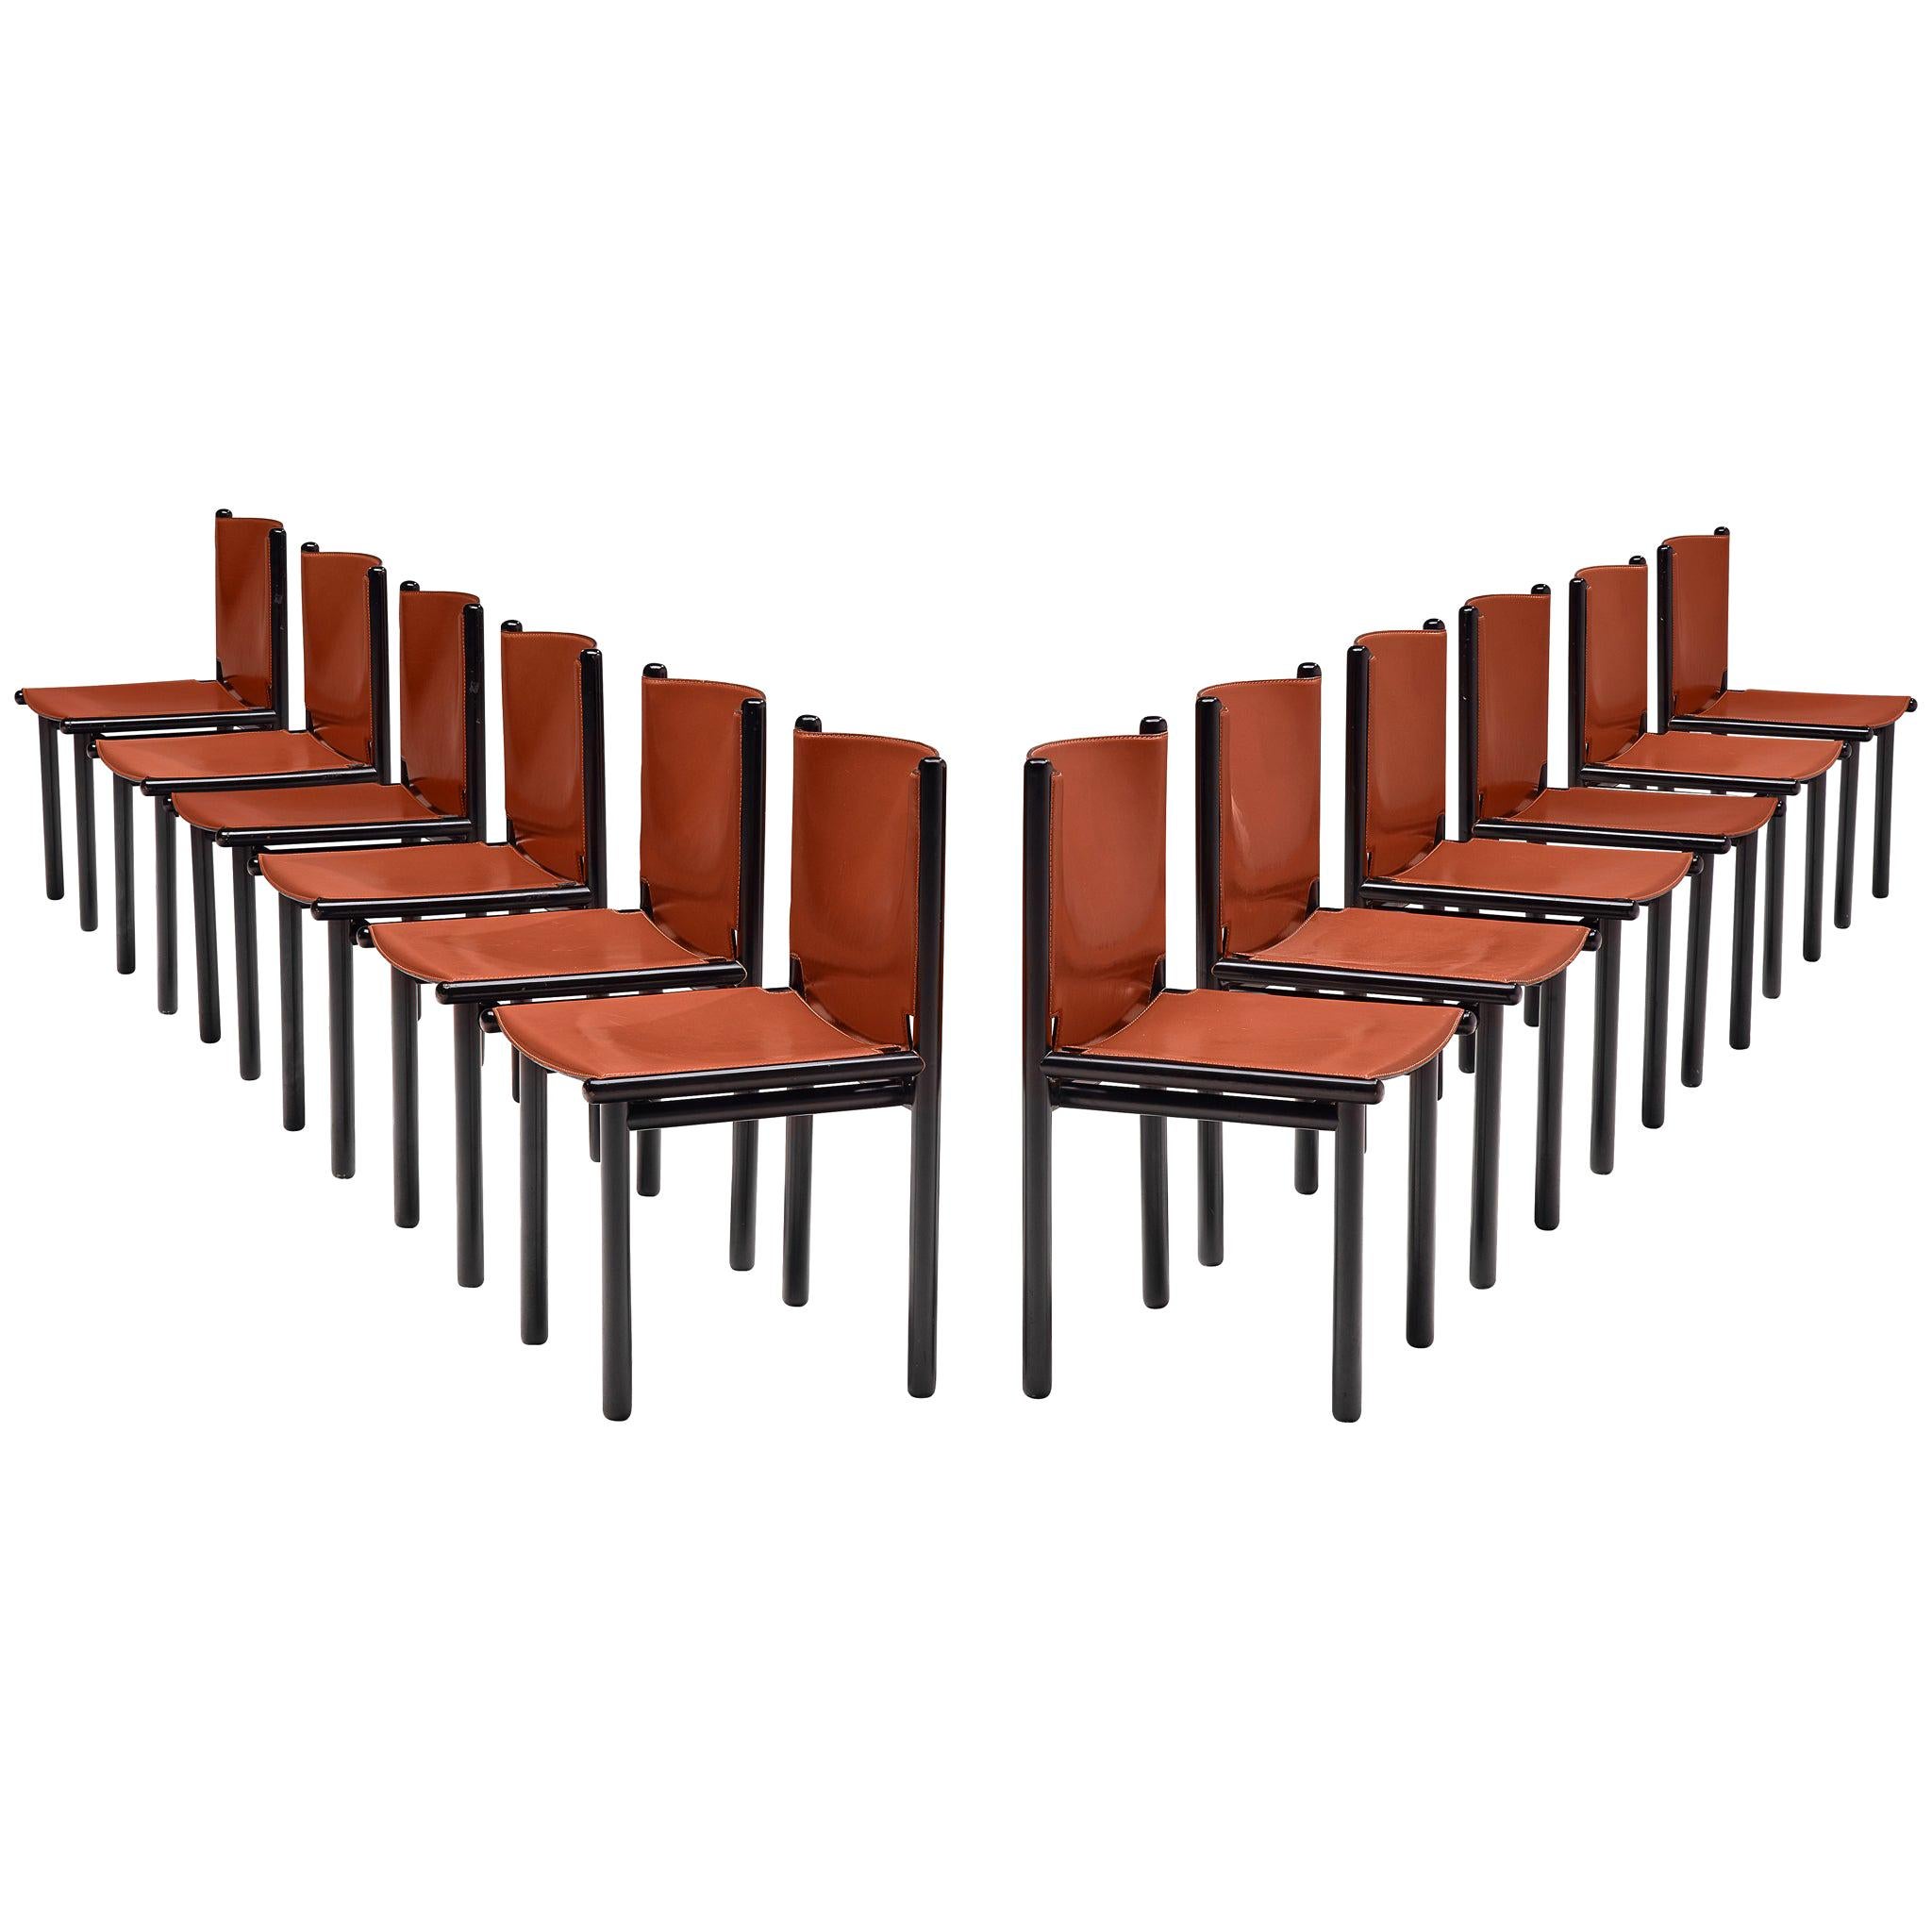 Set of Twelve 'Caprile' Chairs in Red Leather by Gianfranco Frattini